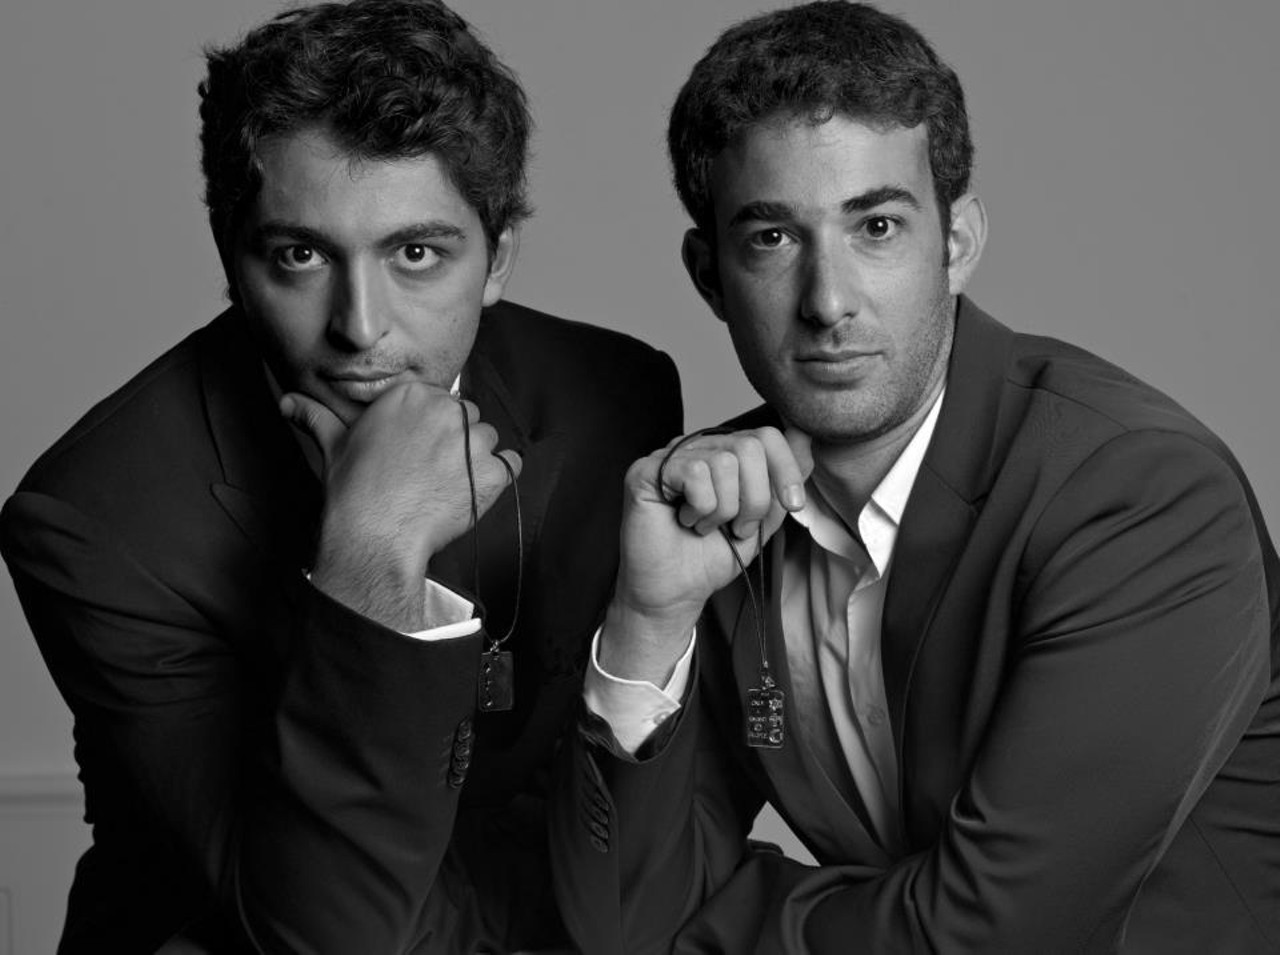 While Israel and Palestine remain locked in conflict, two pianists from these nations bring a ray of hope to this situation through music. Tonight at Severance in the Reinberger Chamber Hall, Duo Amal will prove music can break through political boundaries. Yaron Kohlberg and Bishara Haroni collaborate in a meticulously playful manner in rarely performed musical selections, joining forces as a symbol of peace. “Amal” is an Arabic word that translates to “hope,” and tonight at 8, these musicians will harmoniously work together in what’s sure to be a thrilling concert. Kohlberg and Haroni will hold a pre-concert talk at 7, led by Charles Michener. (Eric Gonzalez)